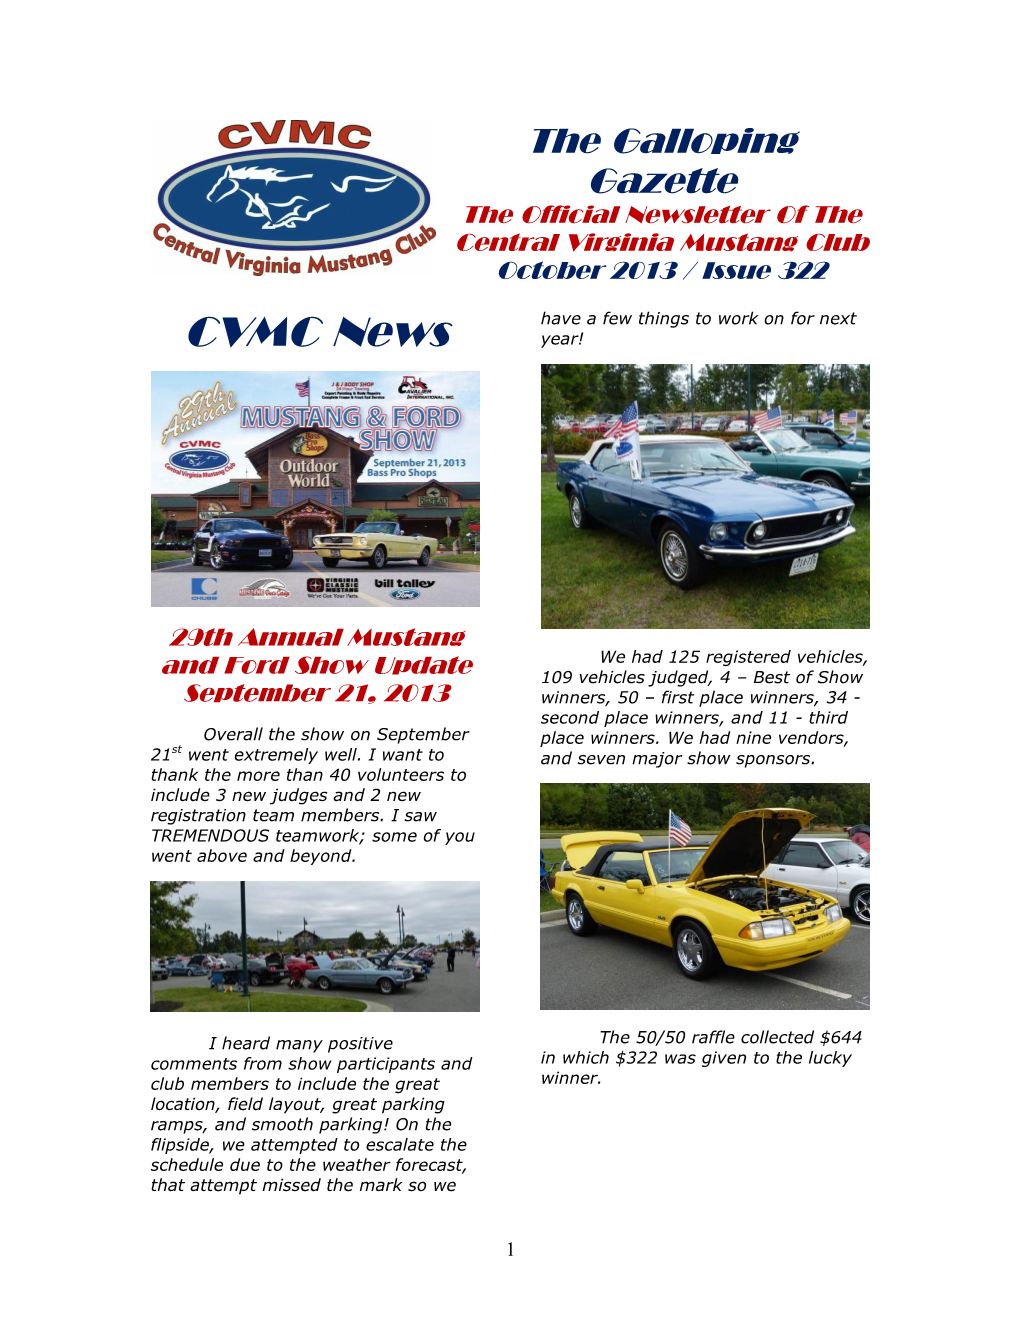 The Galloping Gazette the Official Newsletter of the Central Virginia Mustang Club October 2013 / Issue 322